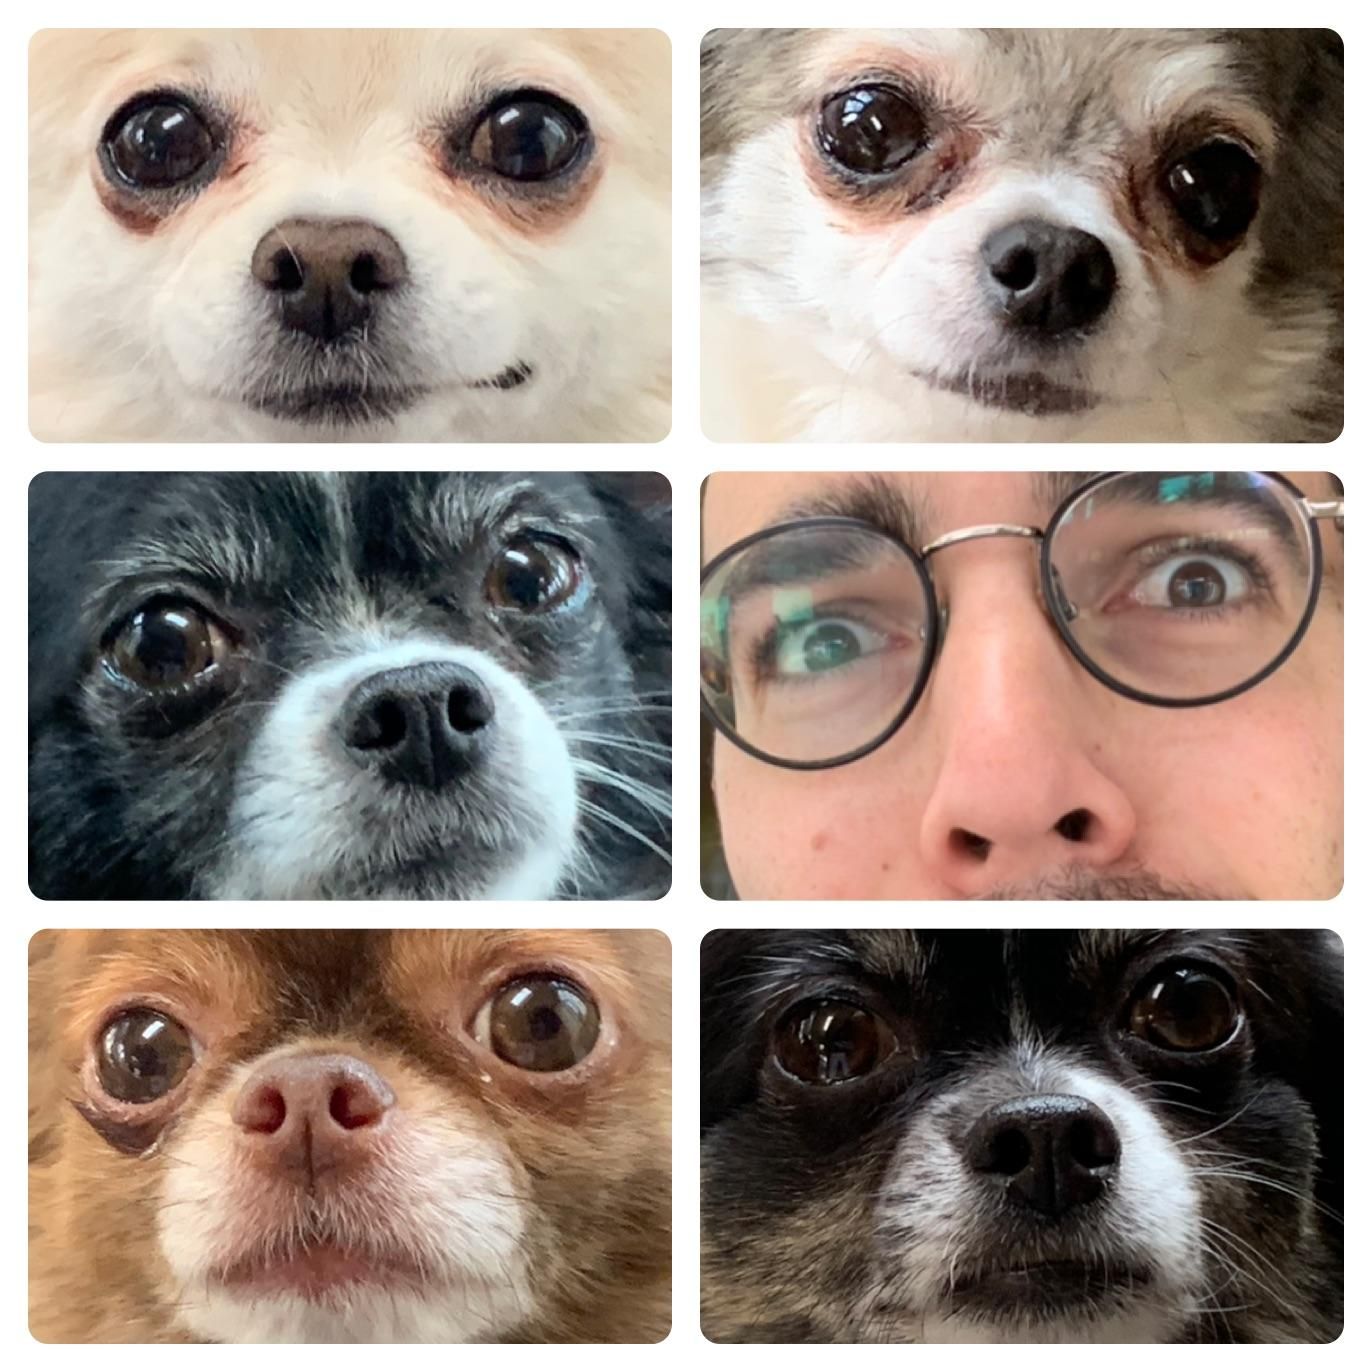 My brother sent this while house sitting 5 chihuahuas